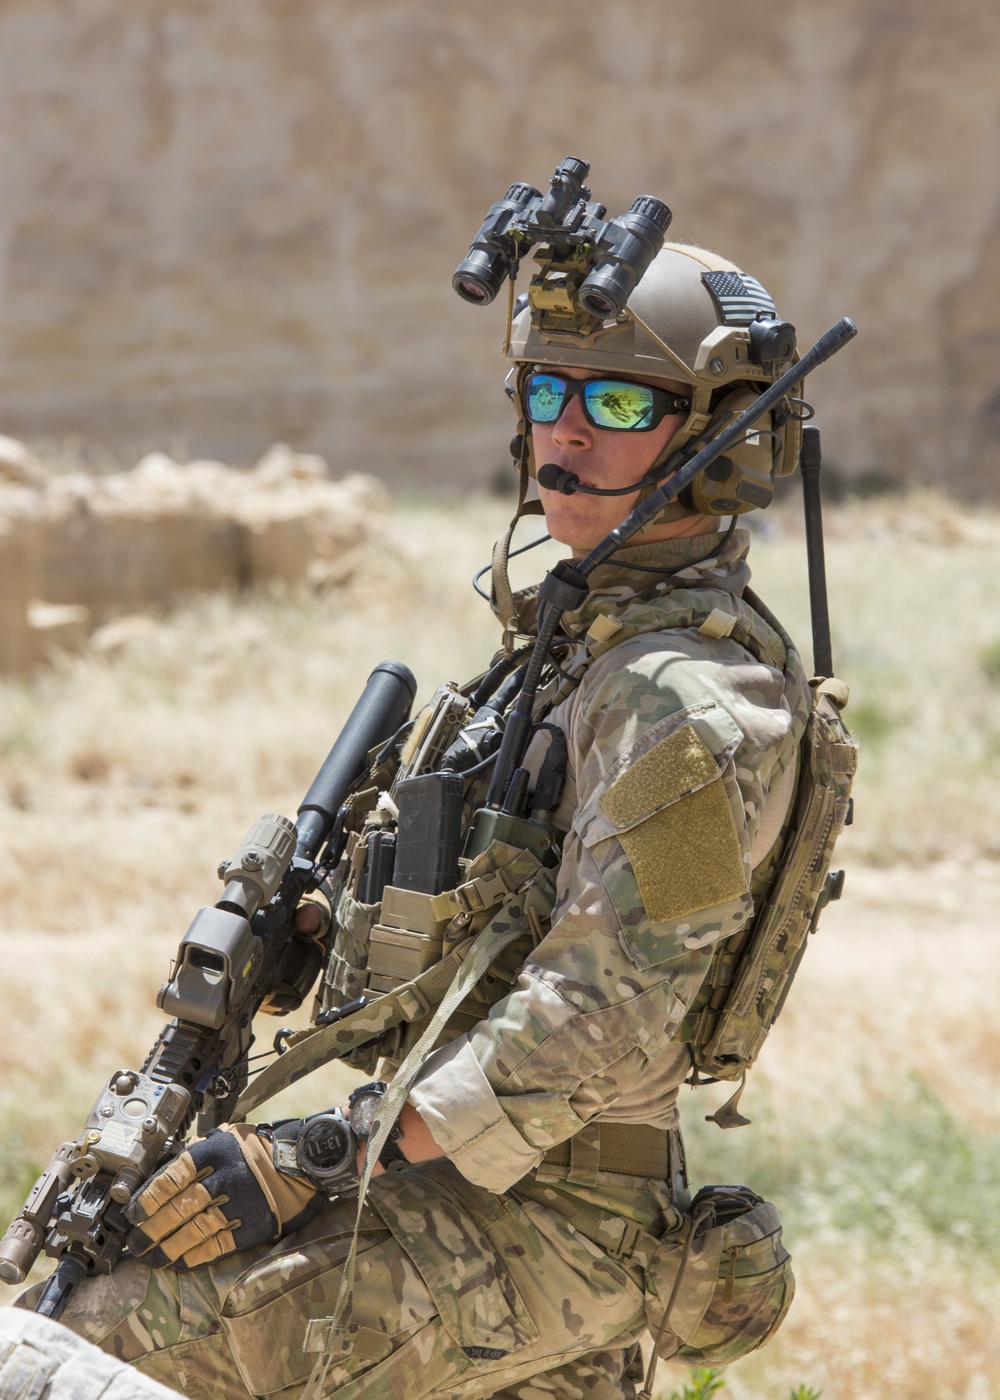 A member of Air Force Special Operations, assigned to the 23rd Special Tactics Squadron, provides security during a combat search and rescue exercise in support of Eager Lion 2017.